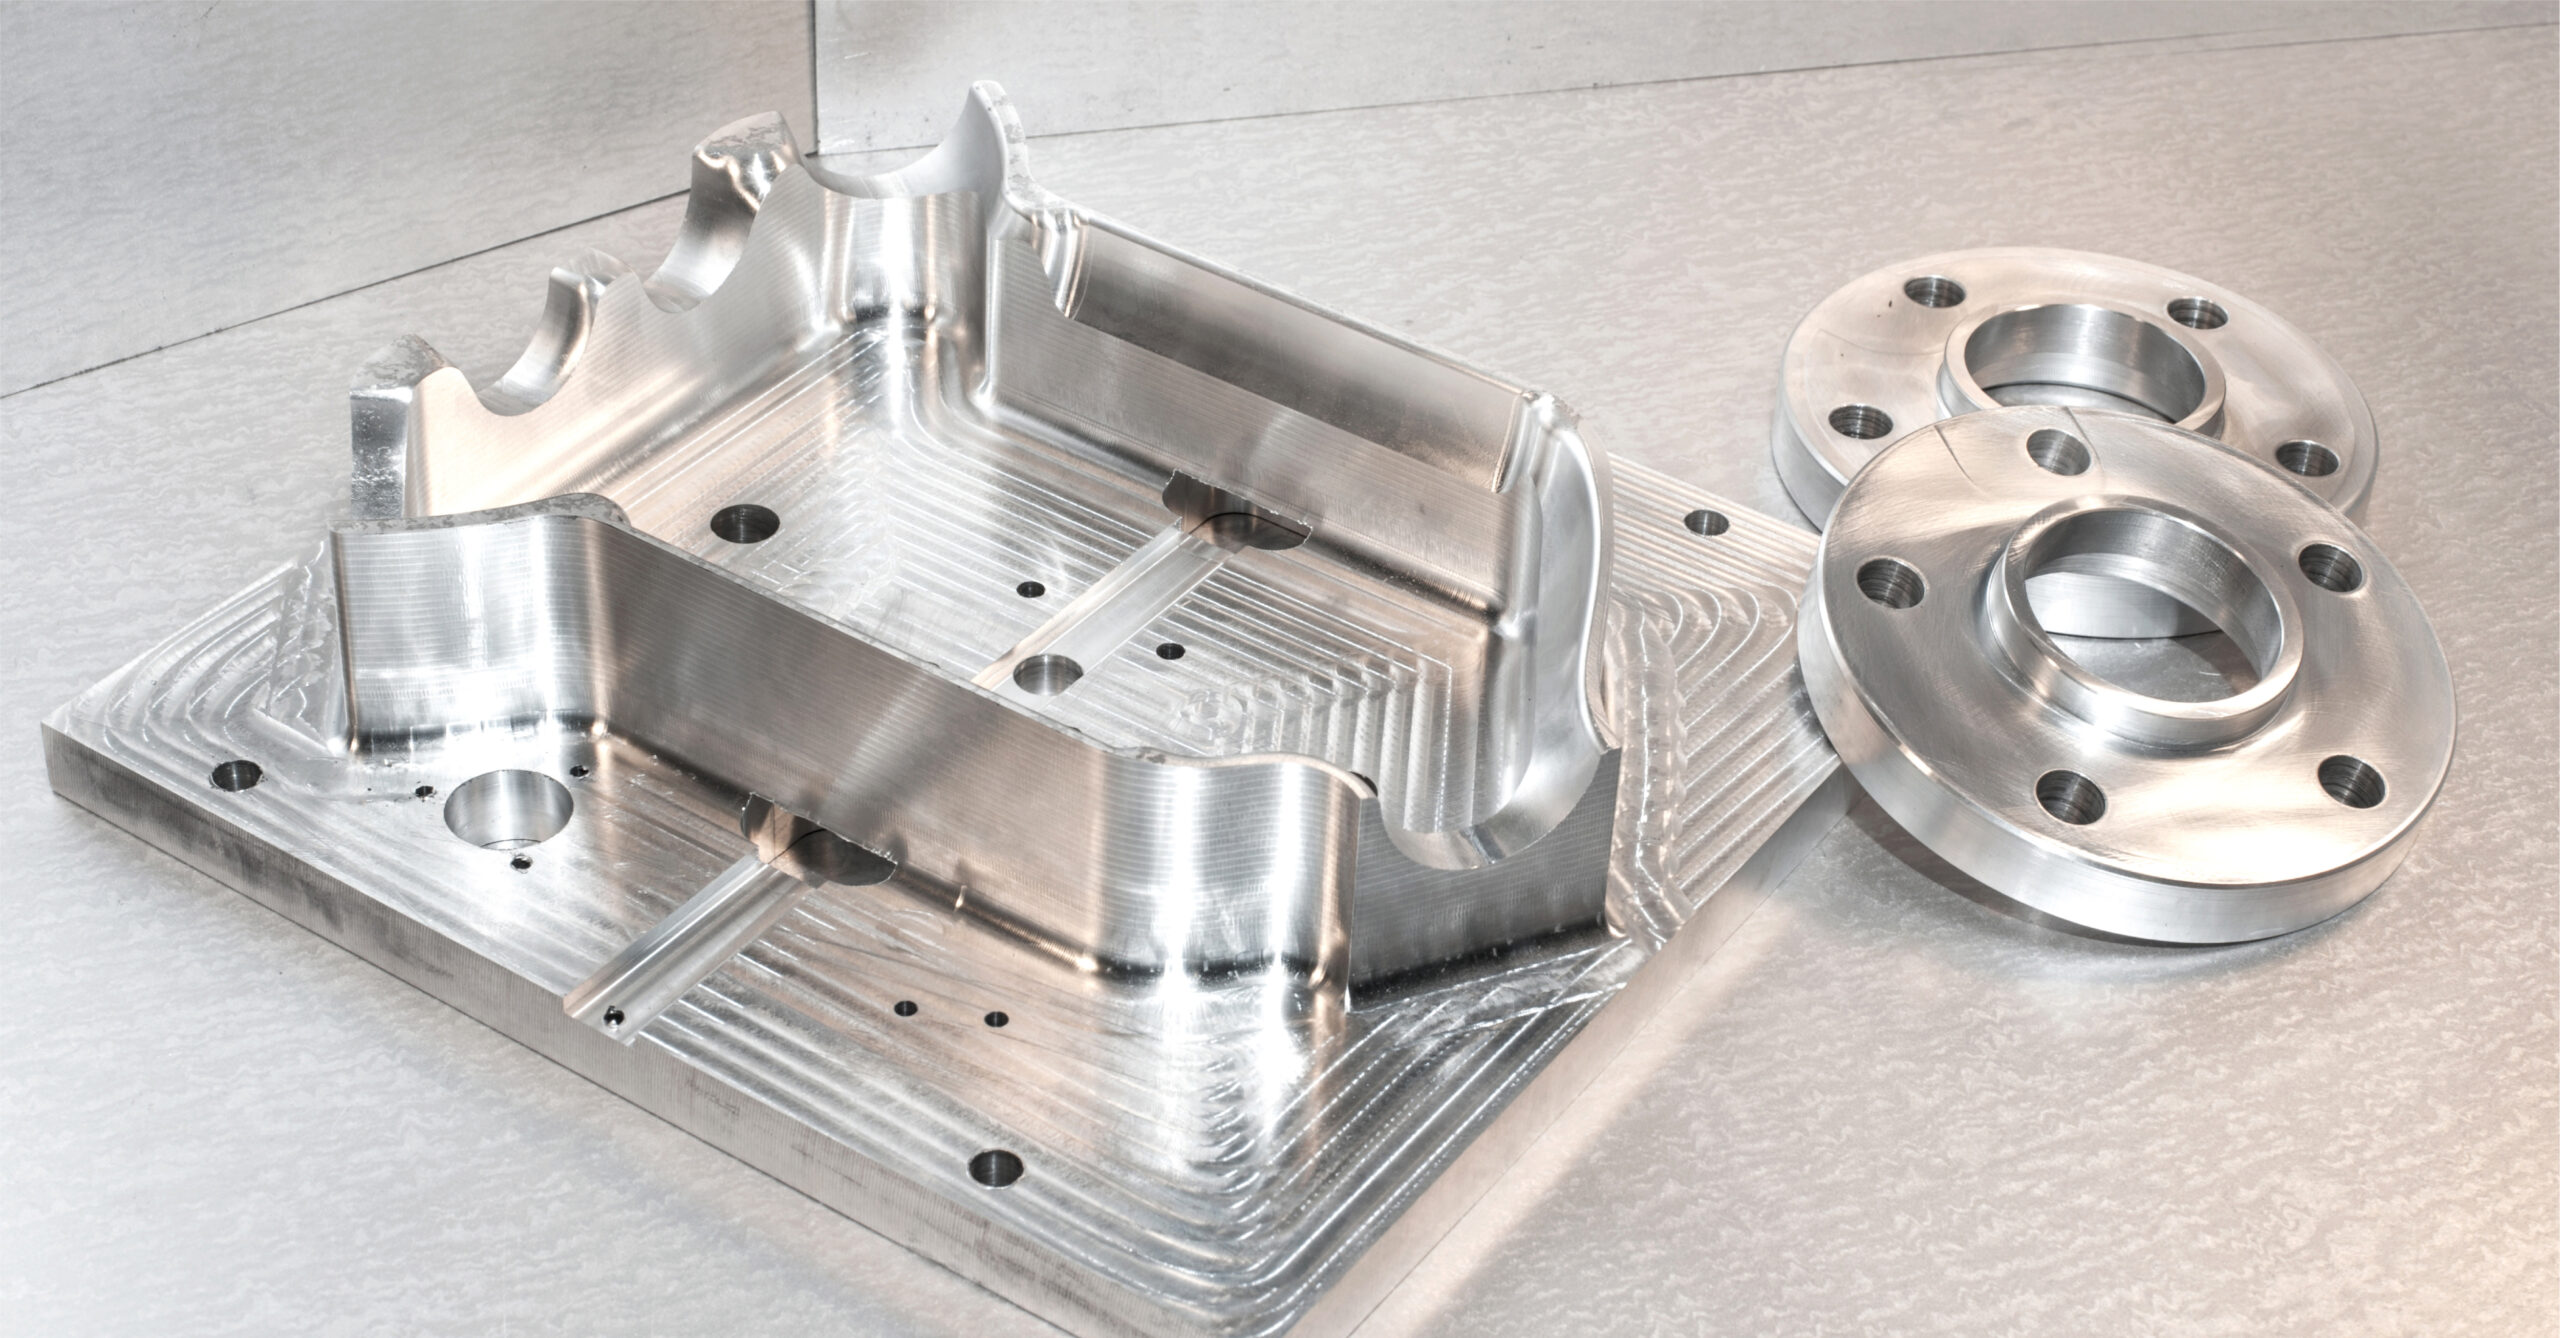 Importance of CNC Services in China in Product Development